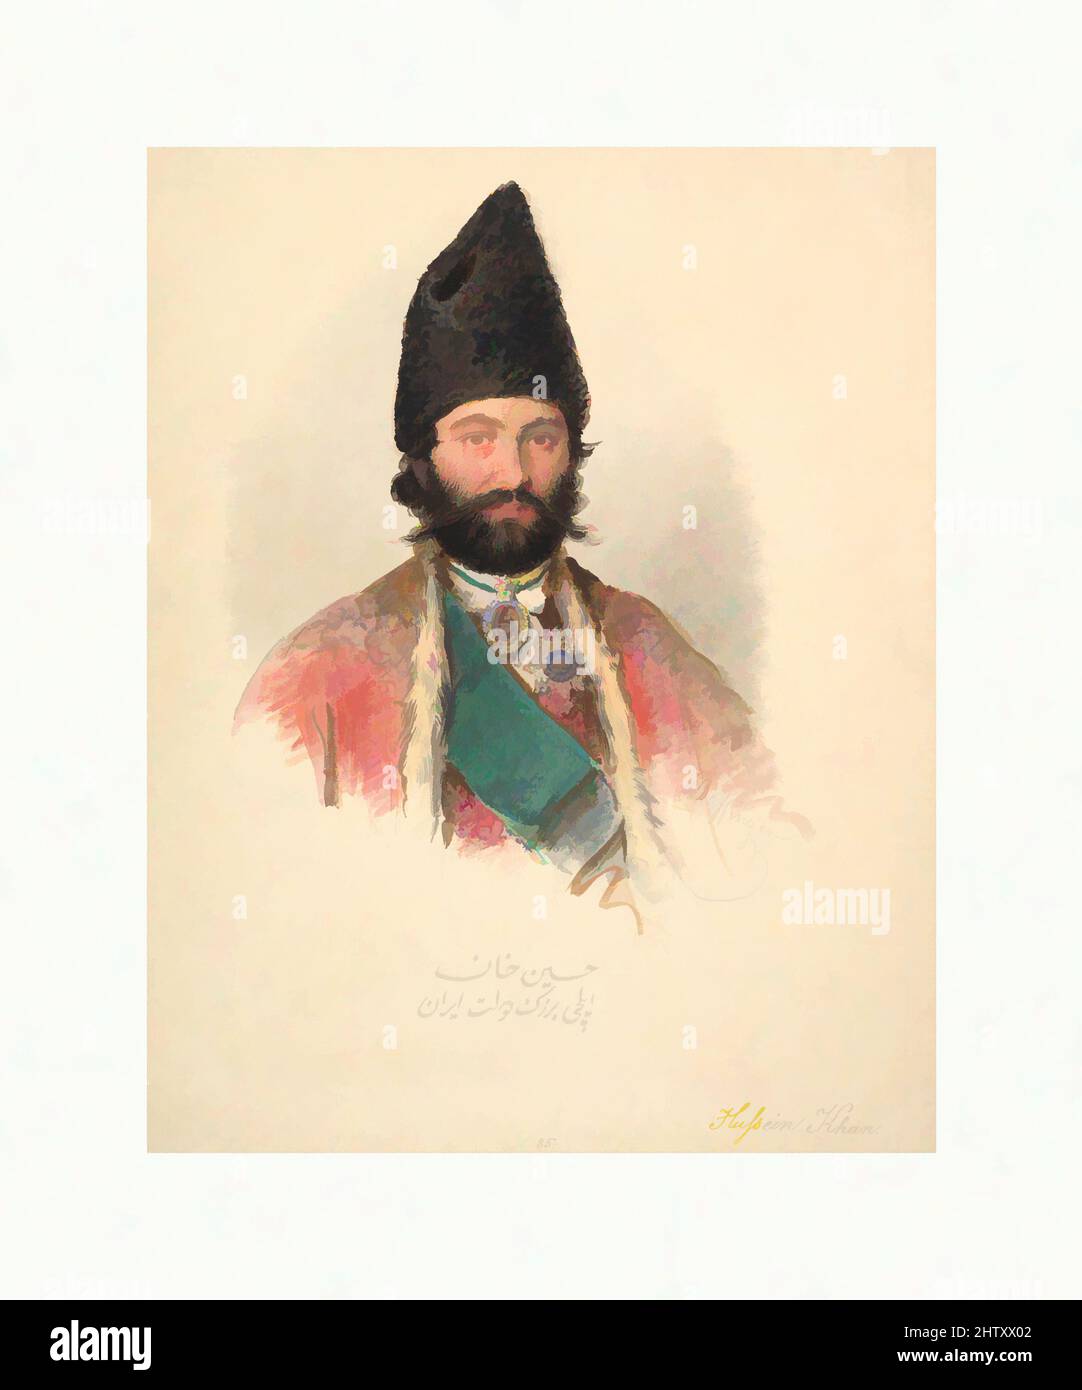 Art inspired by Hussein Khan, 1839, Watercolor and gouache, graphite, Sheet: 6 1/2 x 5 1/8 in. (16.5 x 13 cm), Drawings, Moritz Michael Daffinger (Austrian, Vienna 1790–1849 Vienna, Classic works modernized by Artotop with a splash of modernity. Shapes, color and value, eye-catching visual impact on art. Emotions through freedom of artworks in a contemporary way. A timeless message pursuing a wildly creative new direction. Artists turning to the digital medium and creating the Artotop NFT Stock Photo